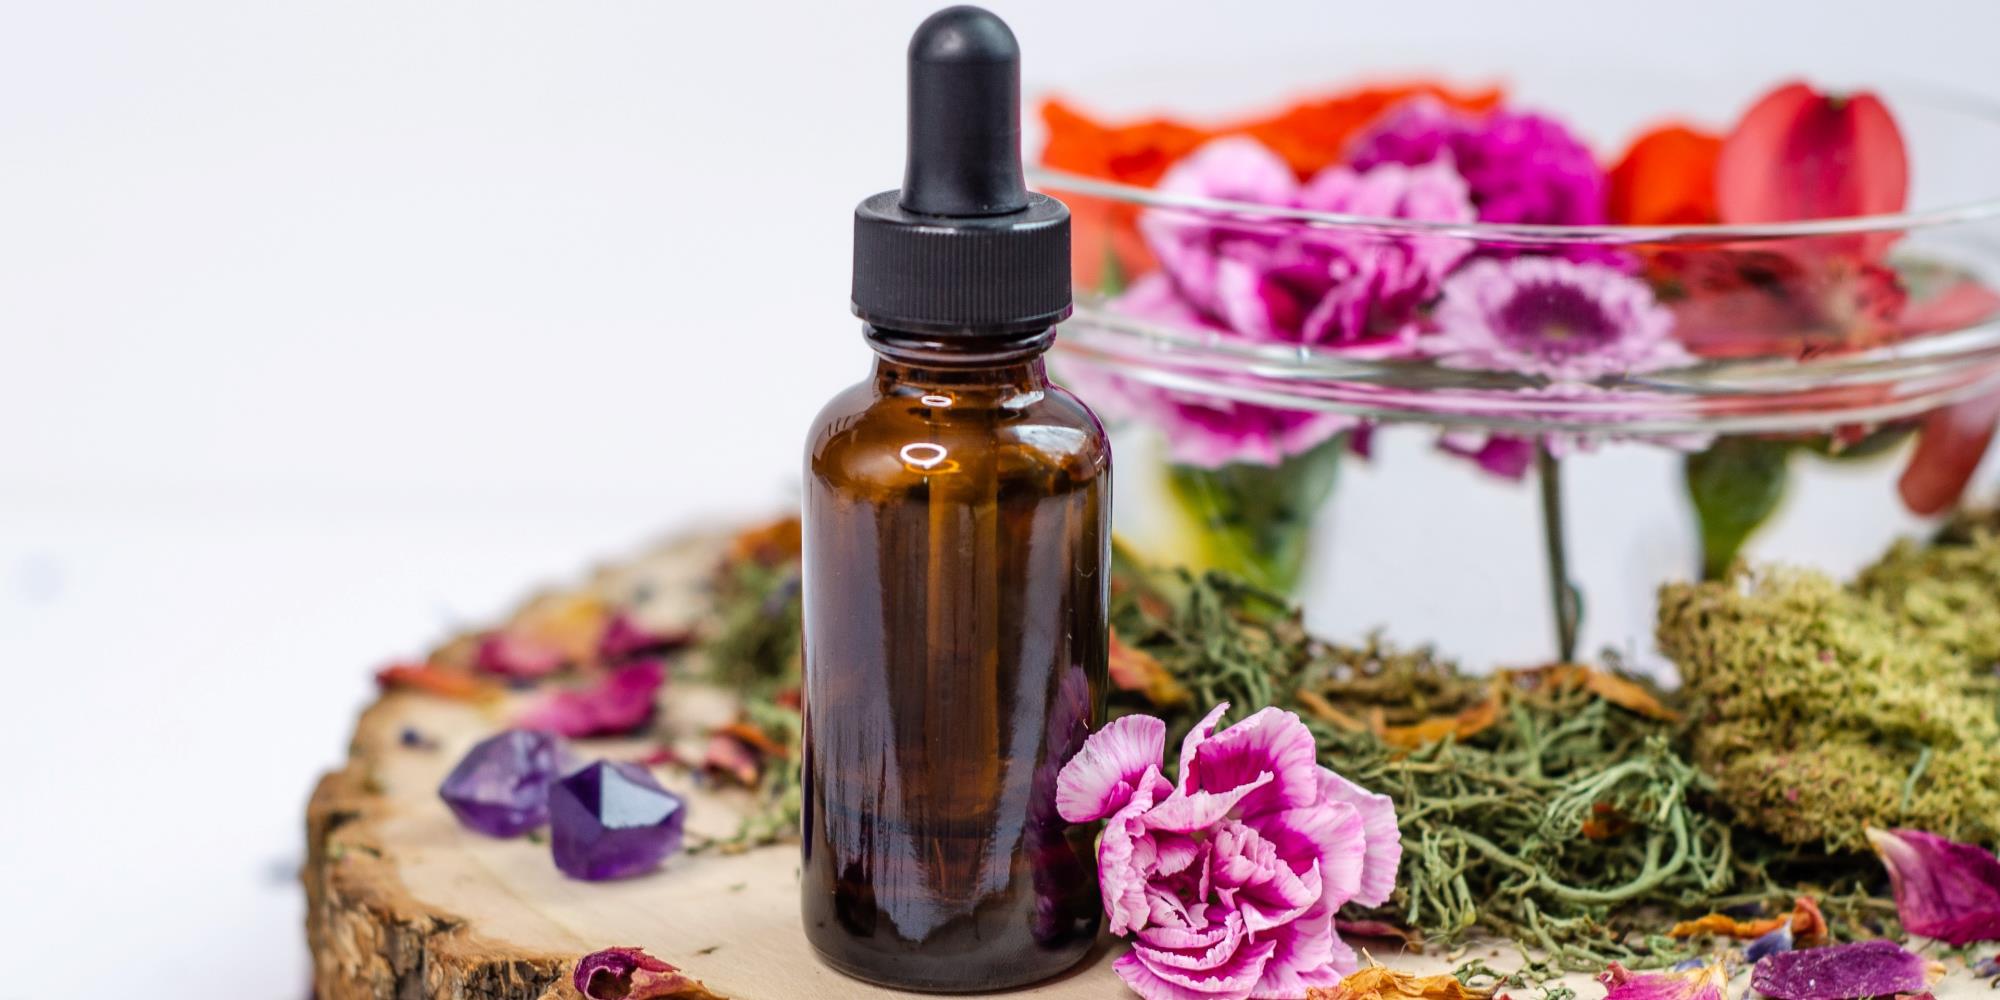 Flower Essences to Deal With PTSD